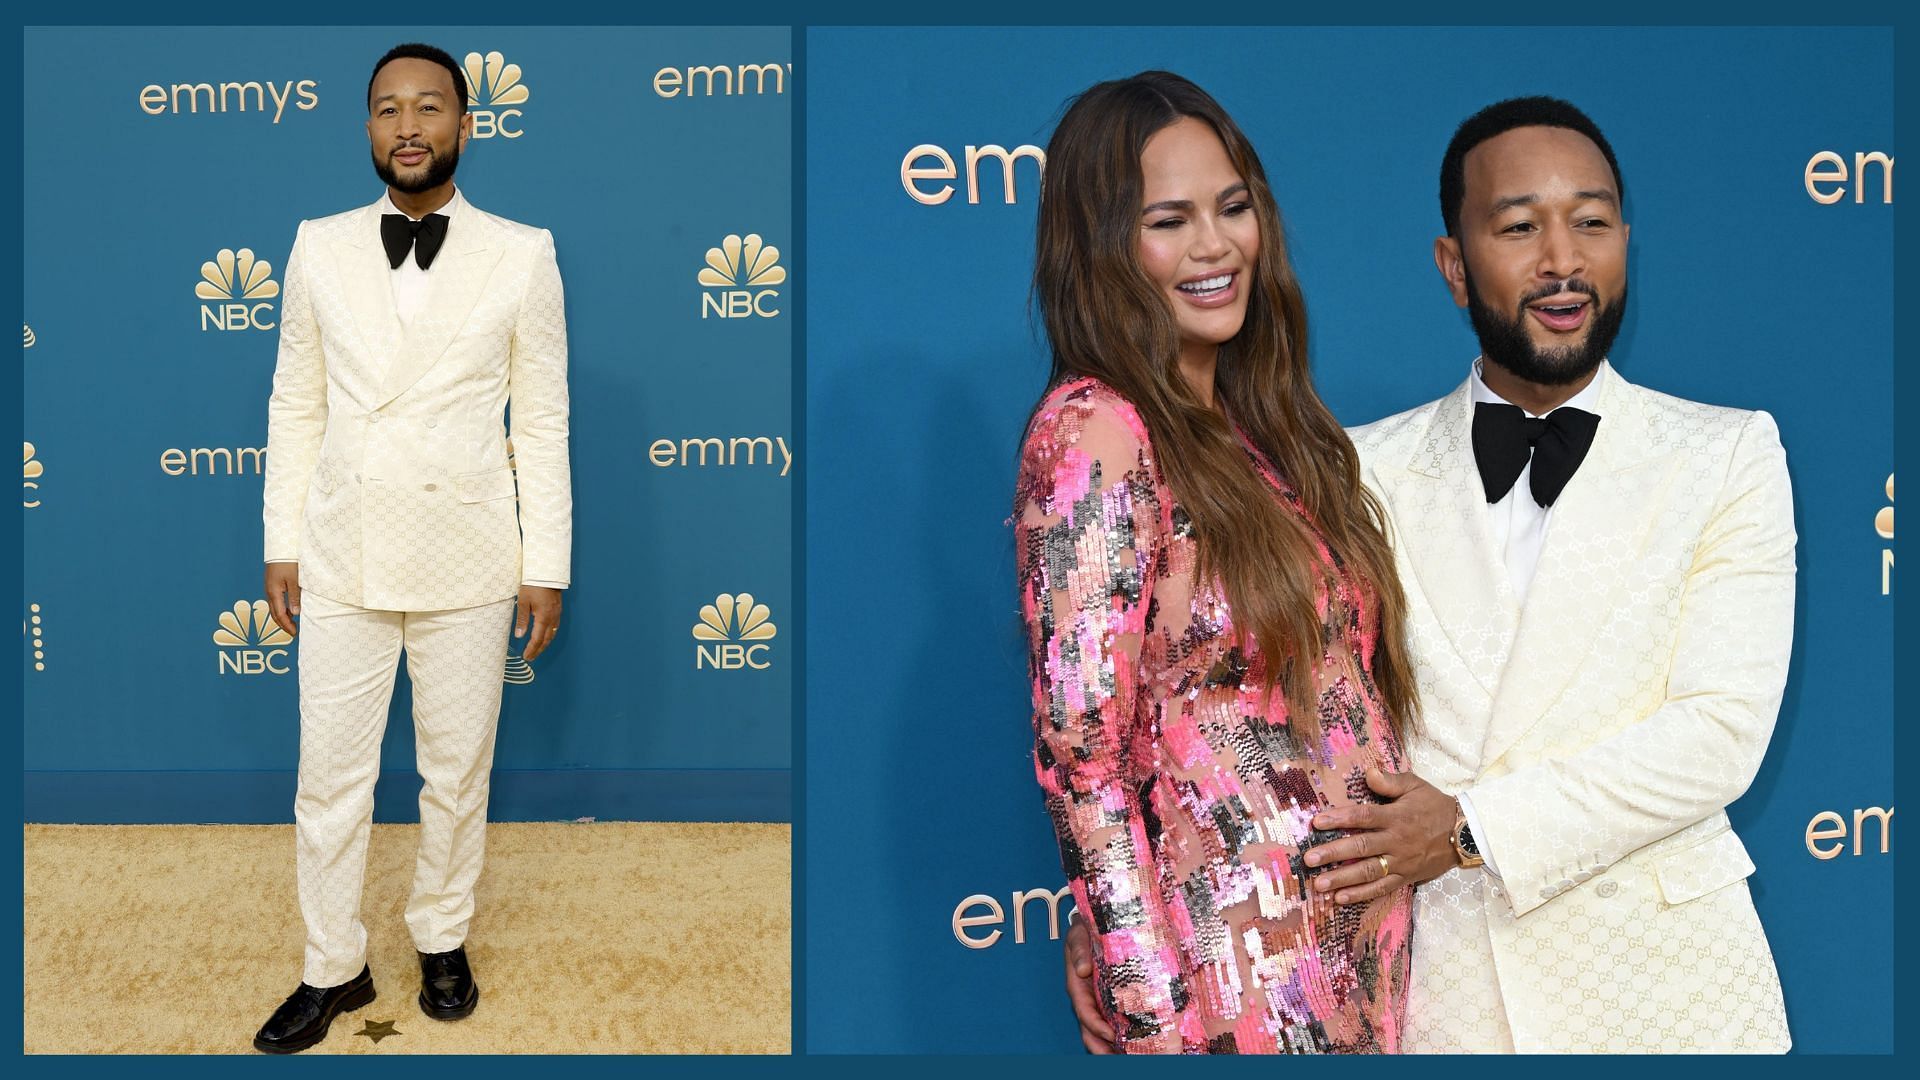 John Legend wore Gucci ensemble for Emmy Awards red carpet (Image via Twitter/@iheartradio)